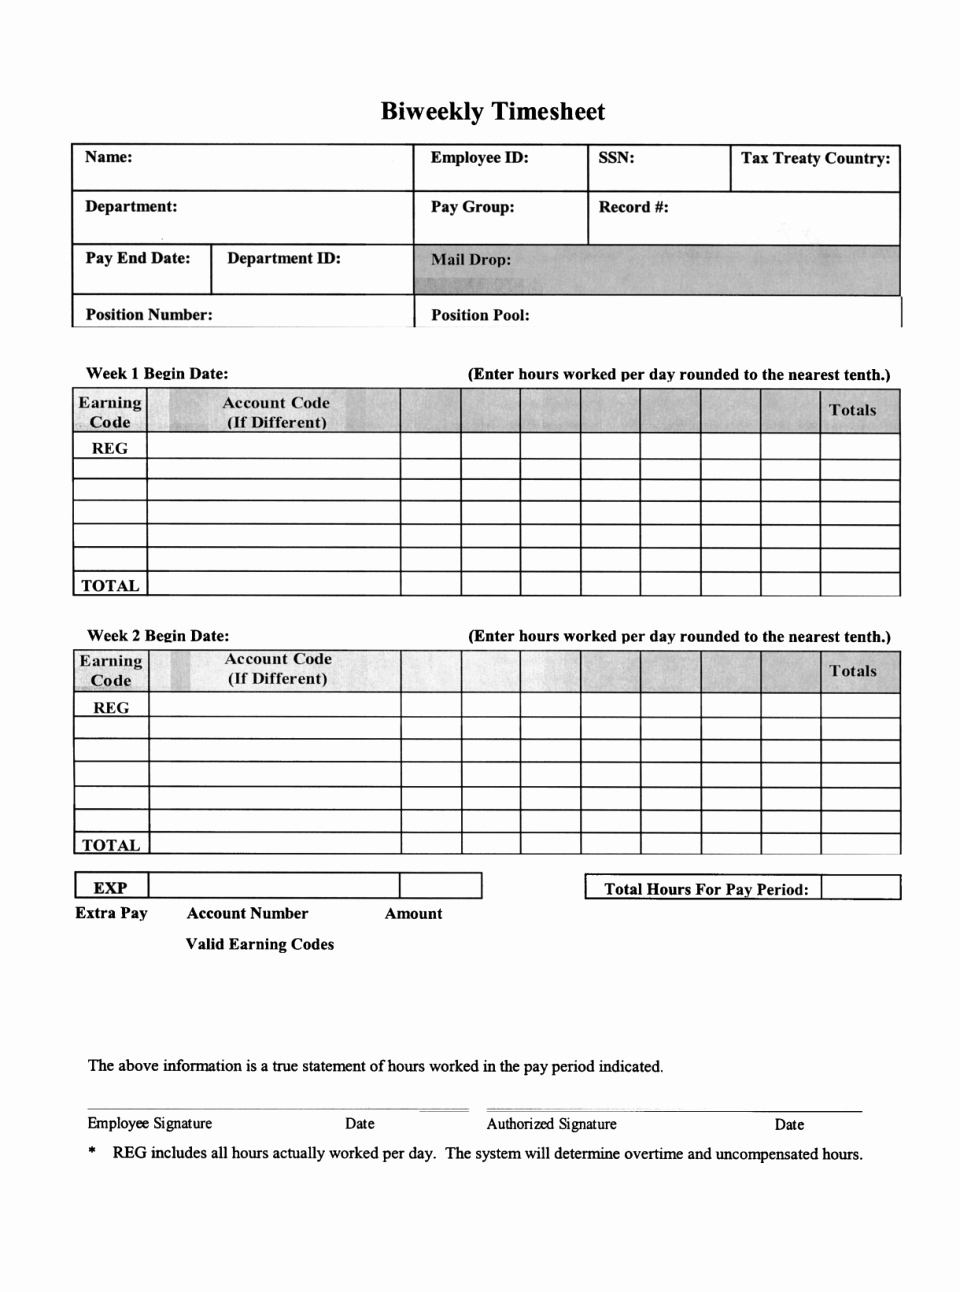 Monthly Timesheet Template Google Docs Fresh Weekly Timesheet Spreadsheet Sheet Template Worksheet and